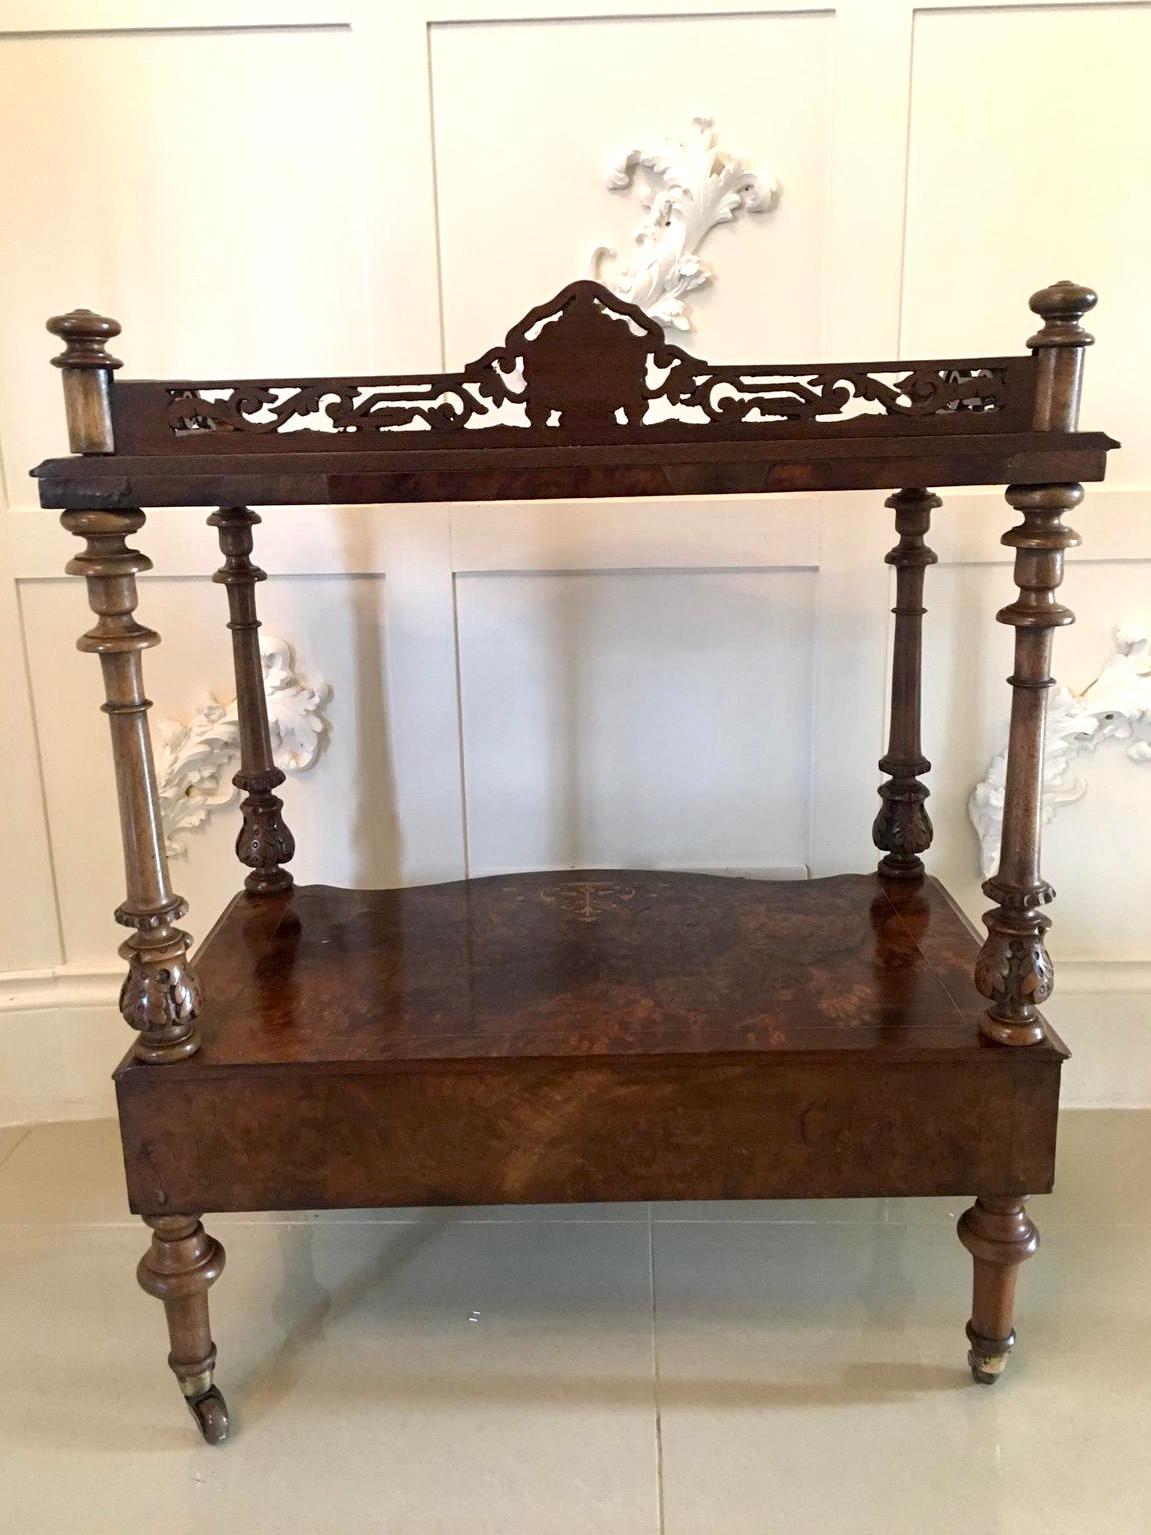 This is a quality 19th century antique Victorian burr walnut inlaid whatnot having a pretty carved pierced inlaid gallery and a splendid burr walnut inlaid serpentine shaped top. It is raised on 4 elegantly shaped carved turned solid walnut columns